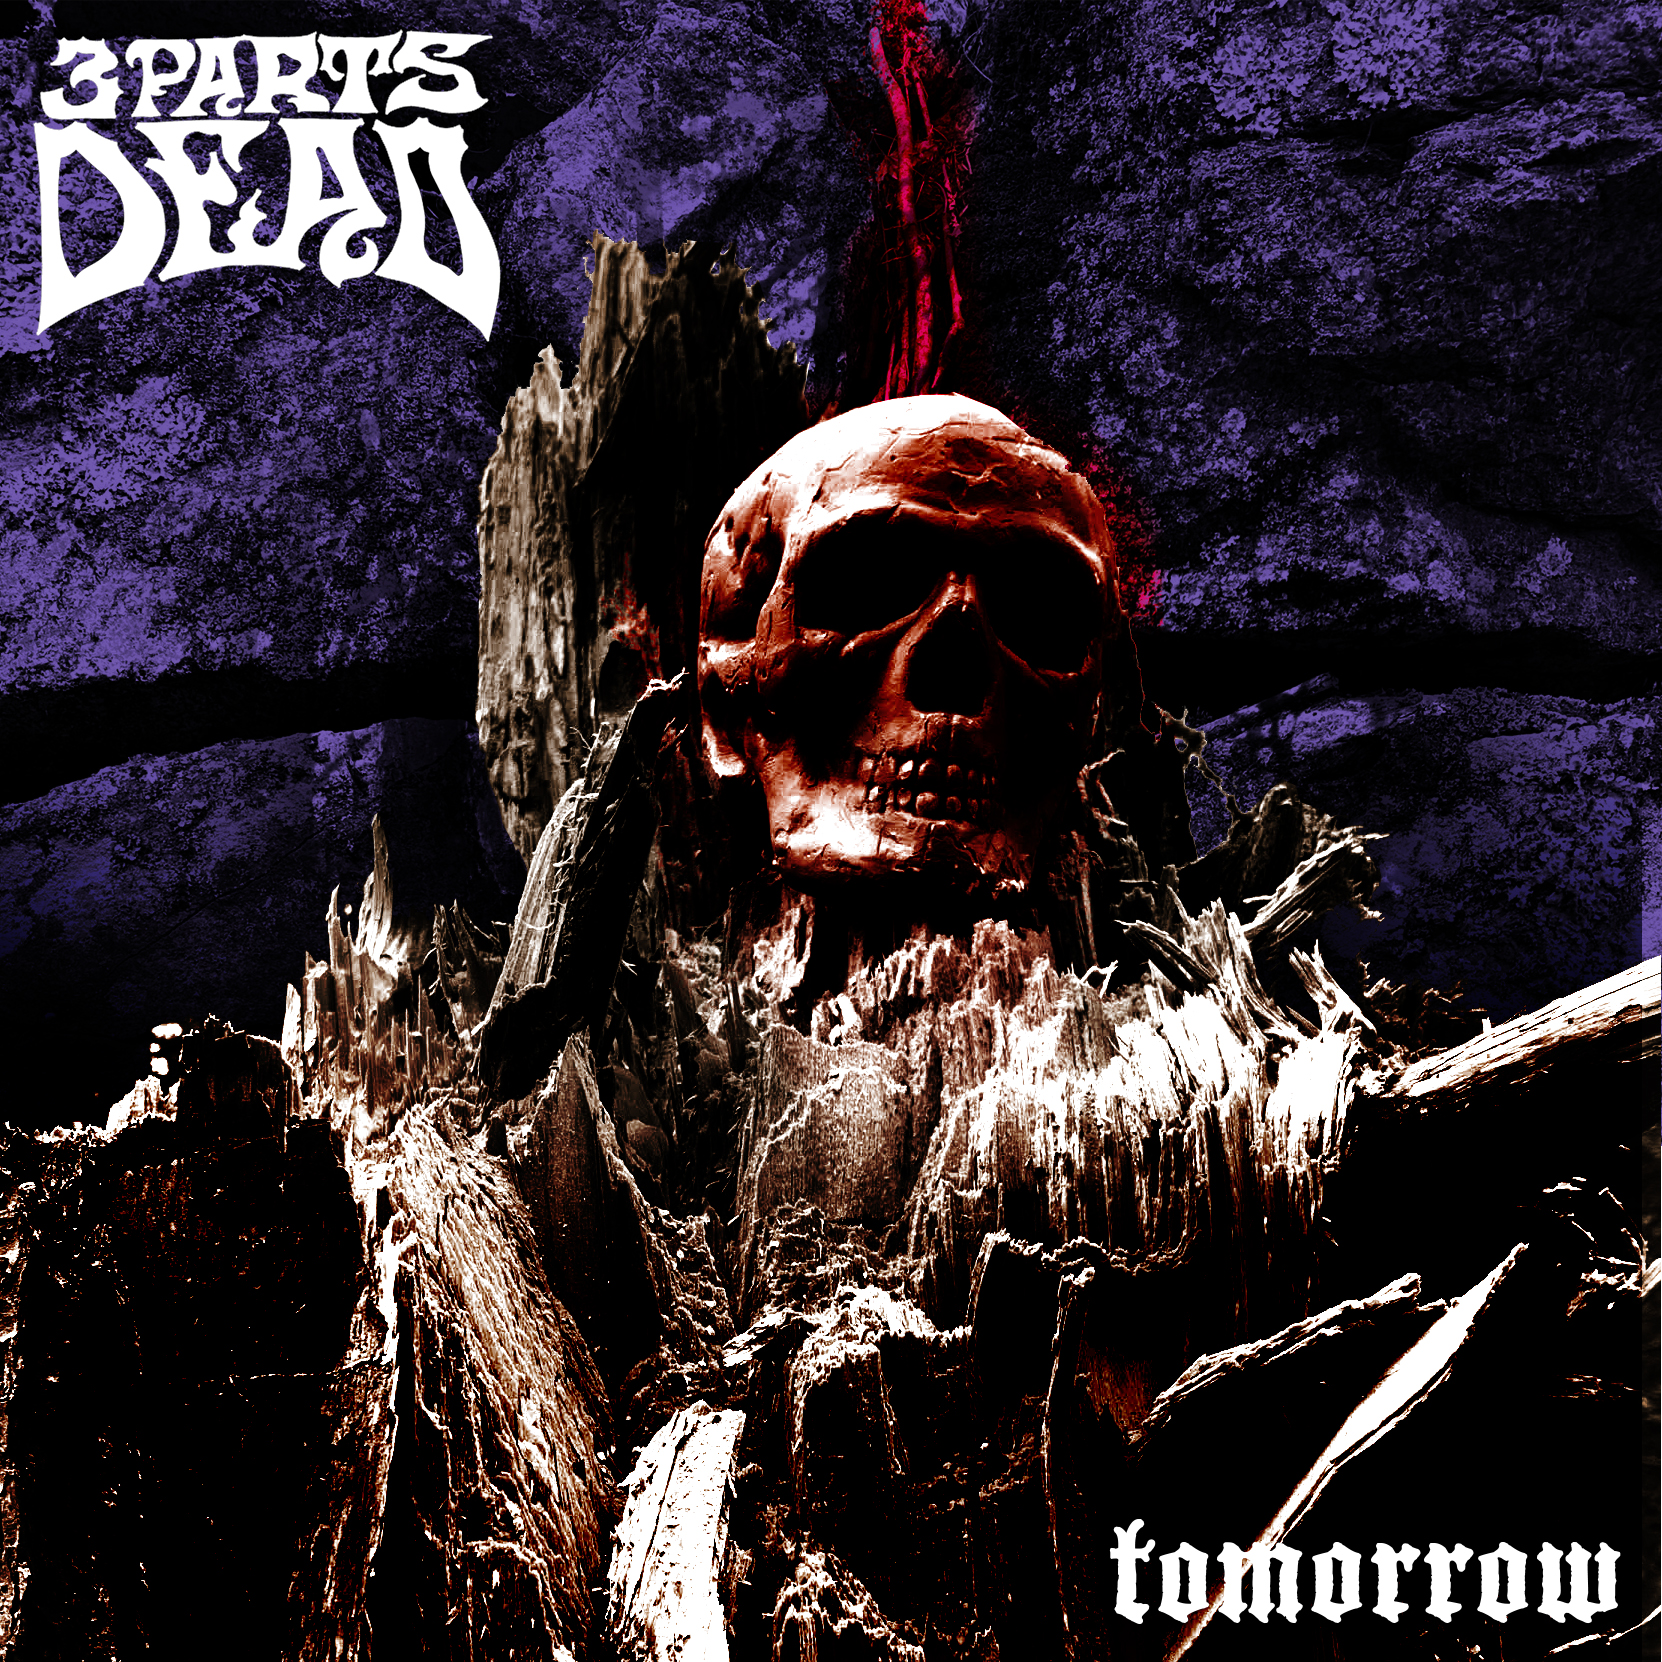 Tomorrow (Audio-Issues mix) - 3 Parts Dead - May 22nd 2020